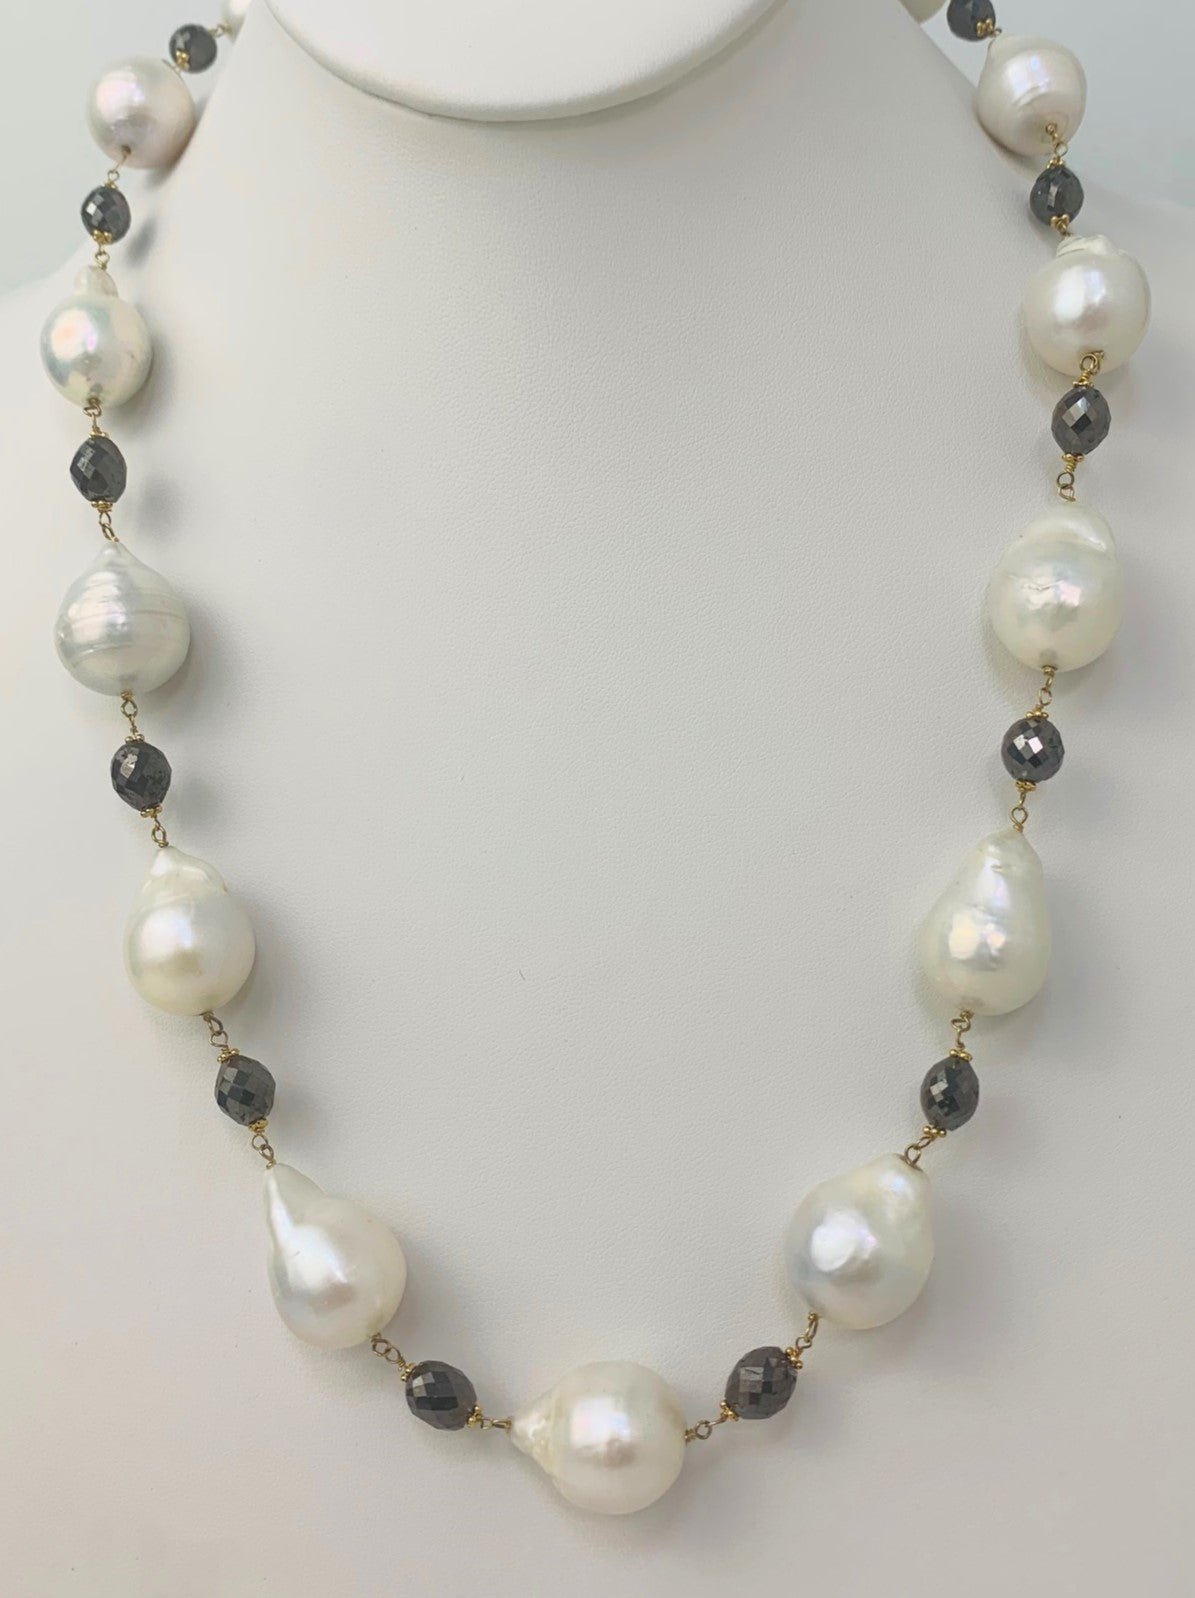 19" Freshwater Baroque Pearl and Black Diamond Oval Bead Rosary Necklace in 14KY - NCK-139-ROSPRLDIA14Y-WHBLK-19-00723 53ctw